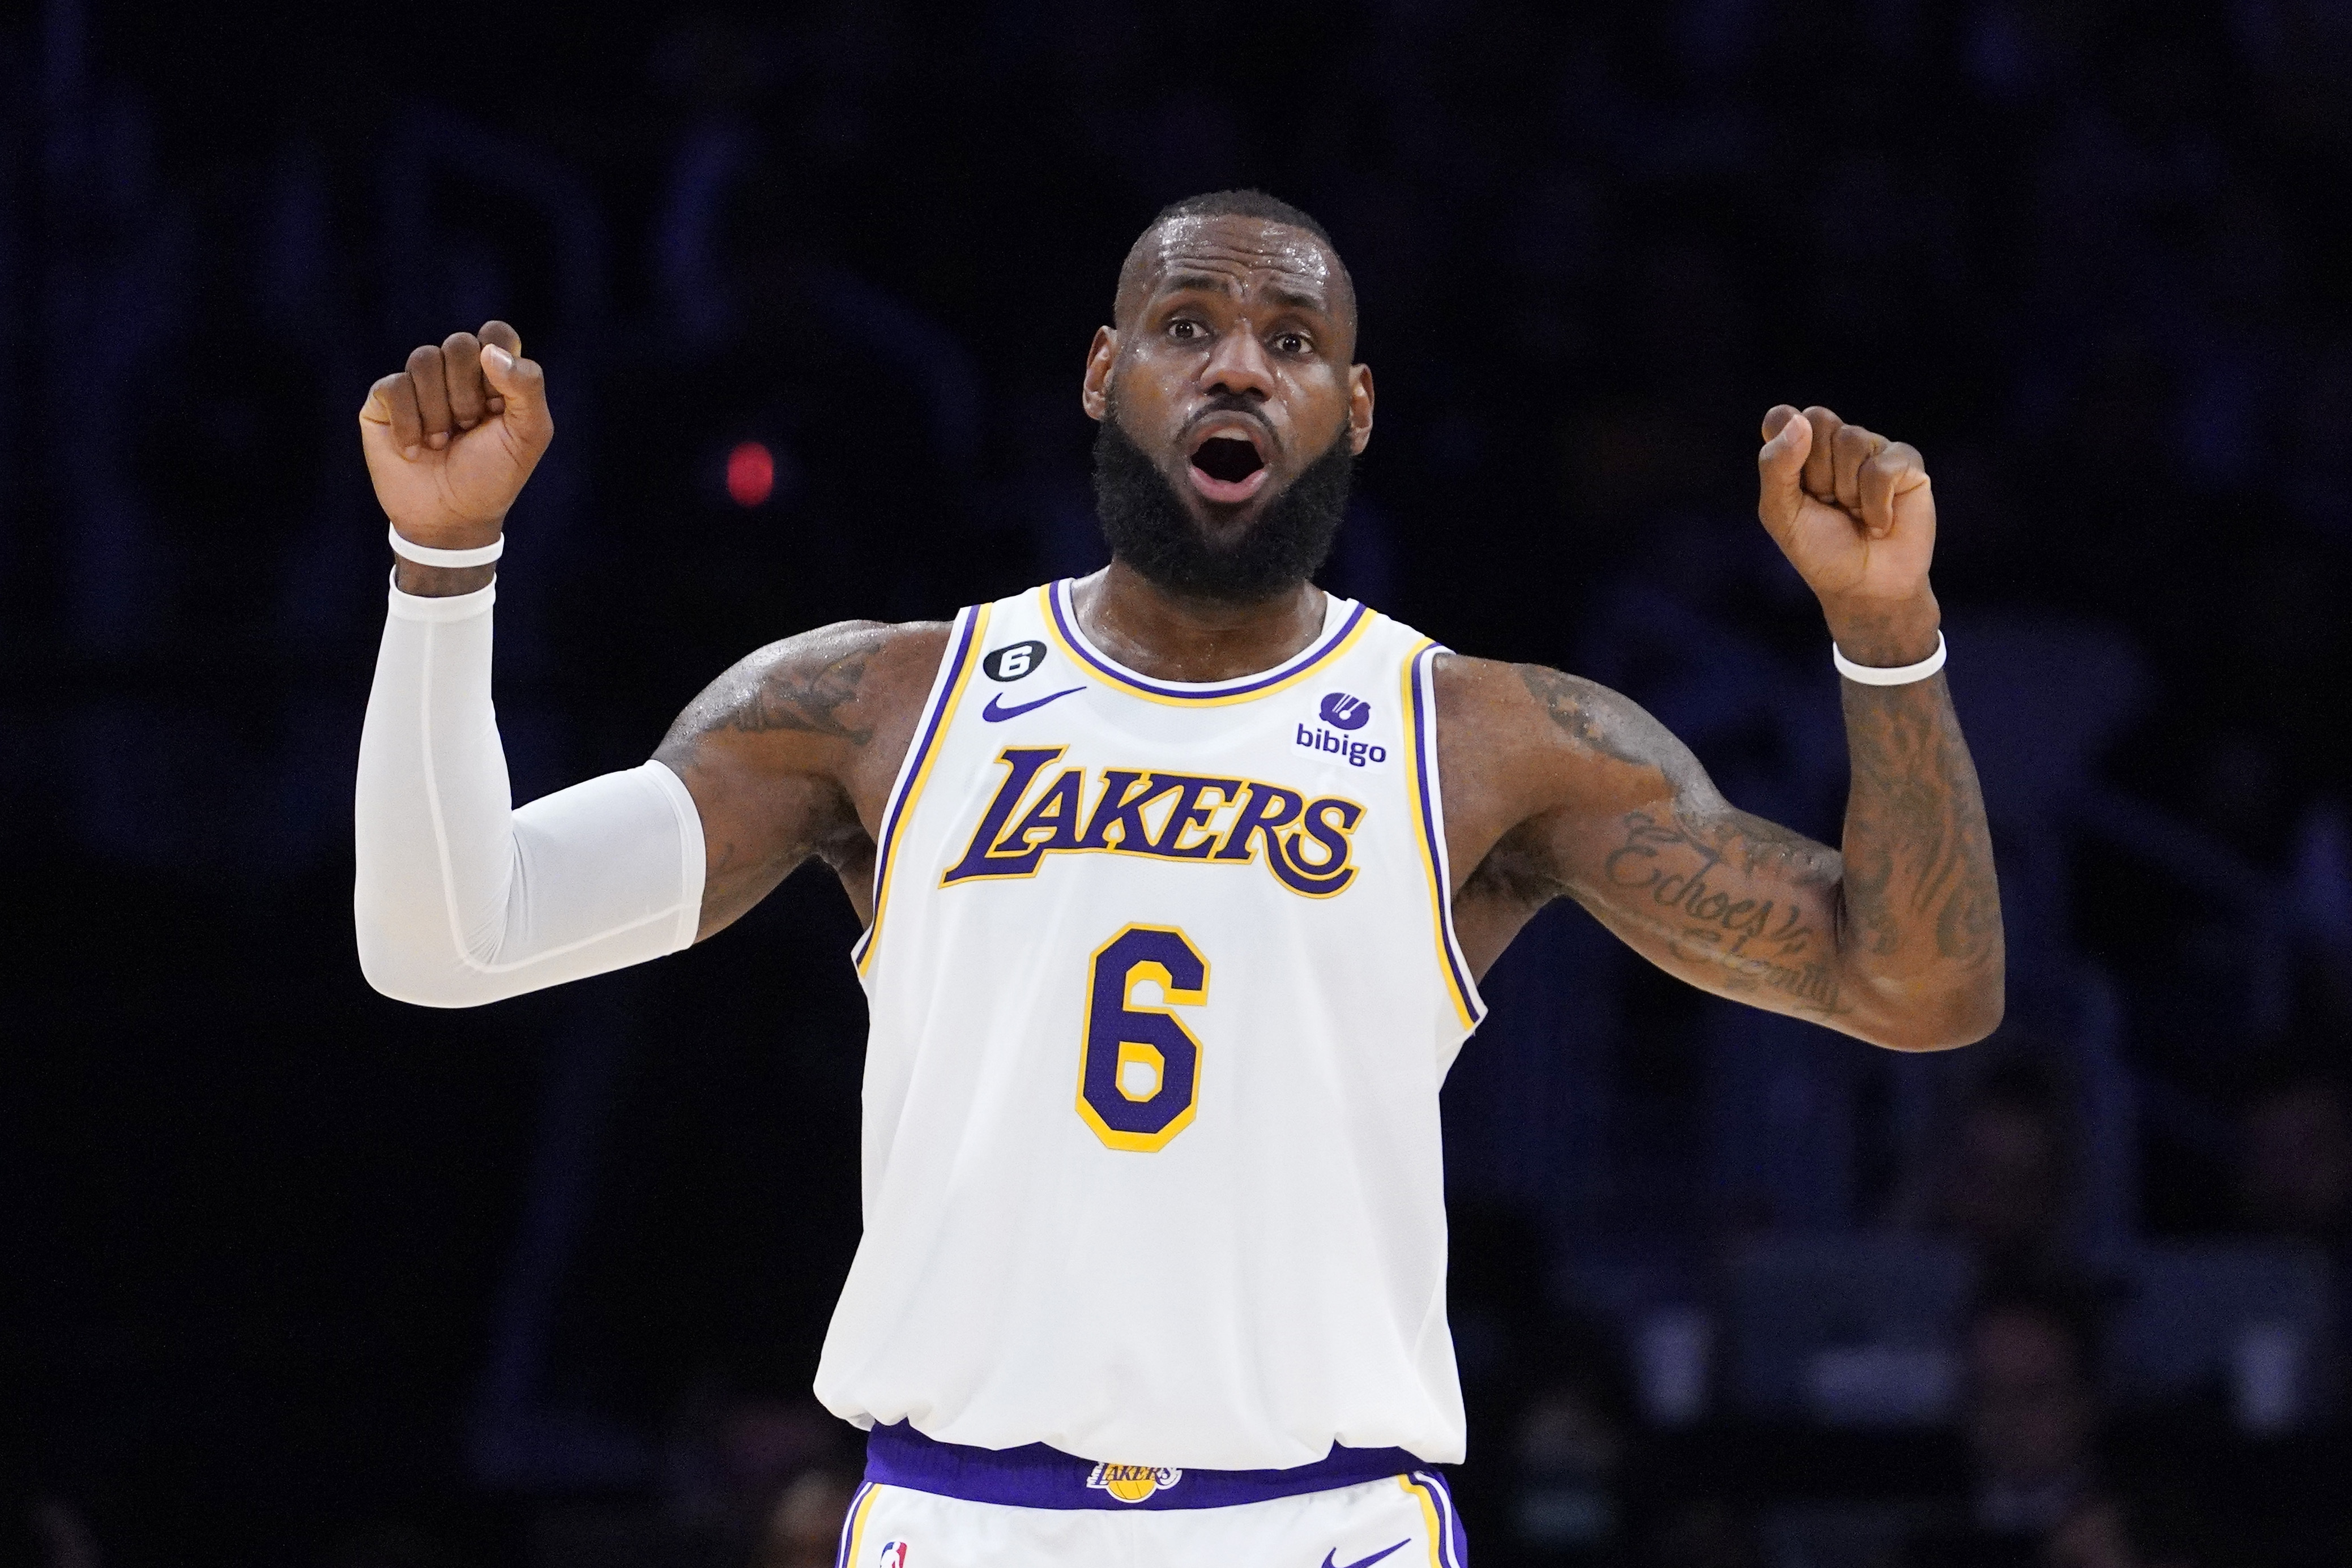 Lakers vs. Heat: Live stream, start time, TV channel, how to watch